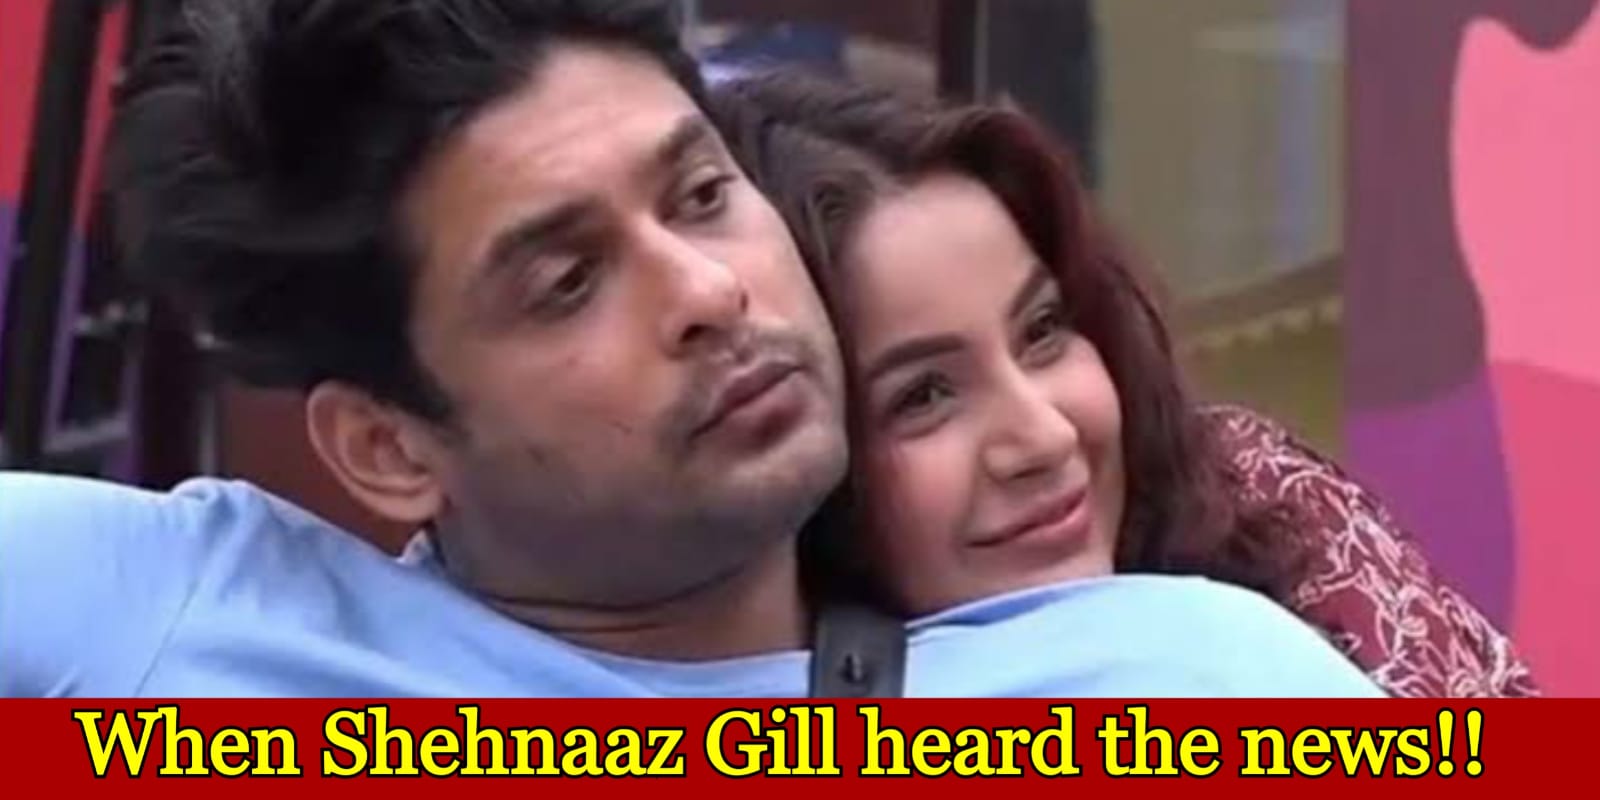 Shehnaaz Gill finally responds to the death of her boyfriend Sidharth Shukla, check out full details